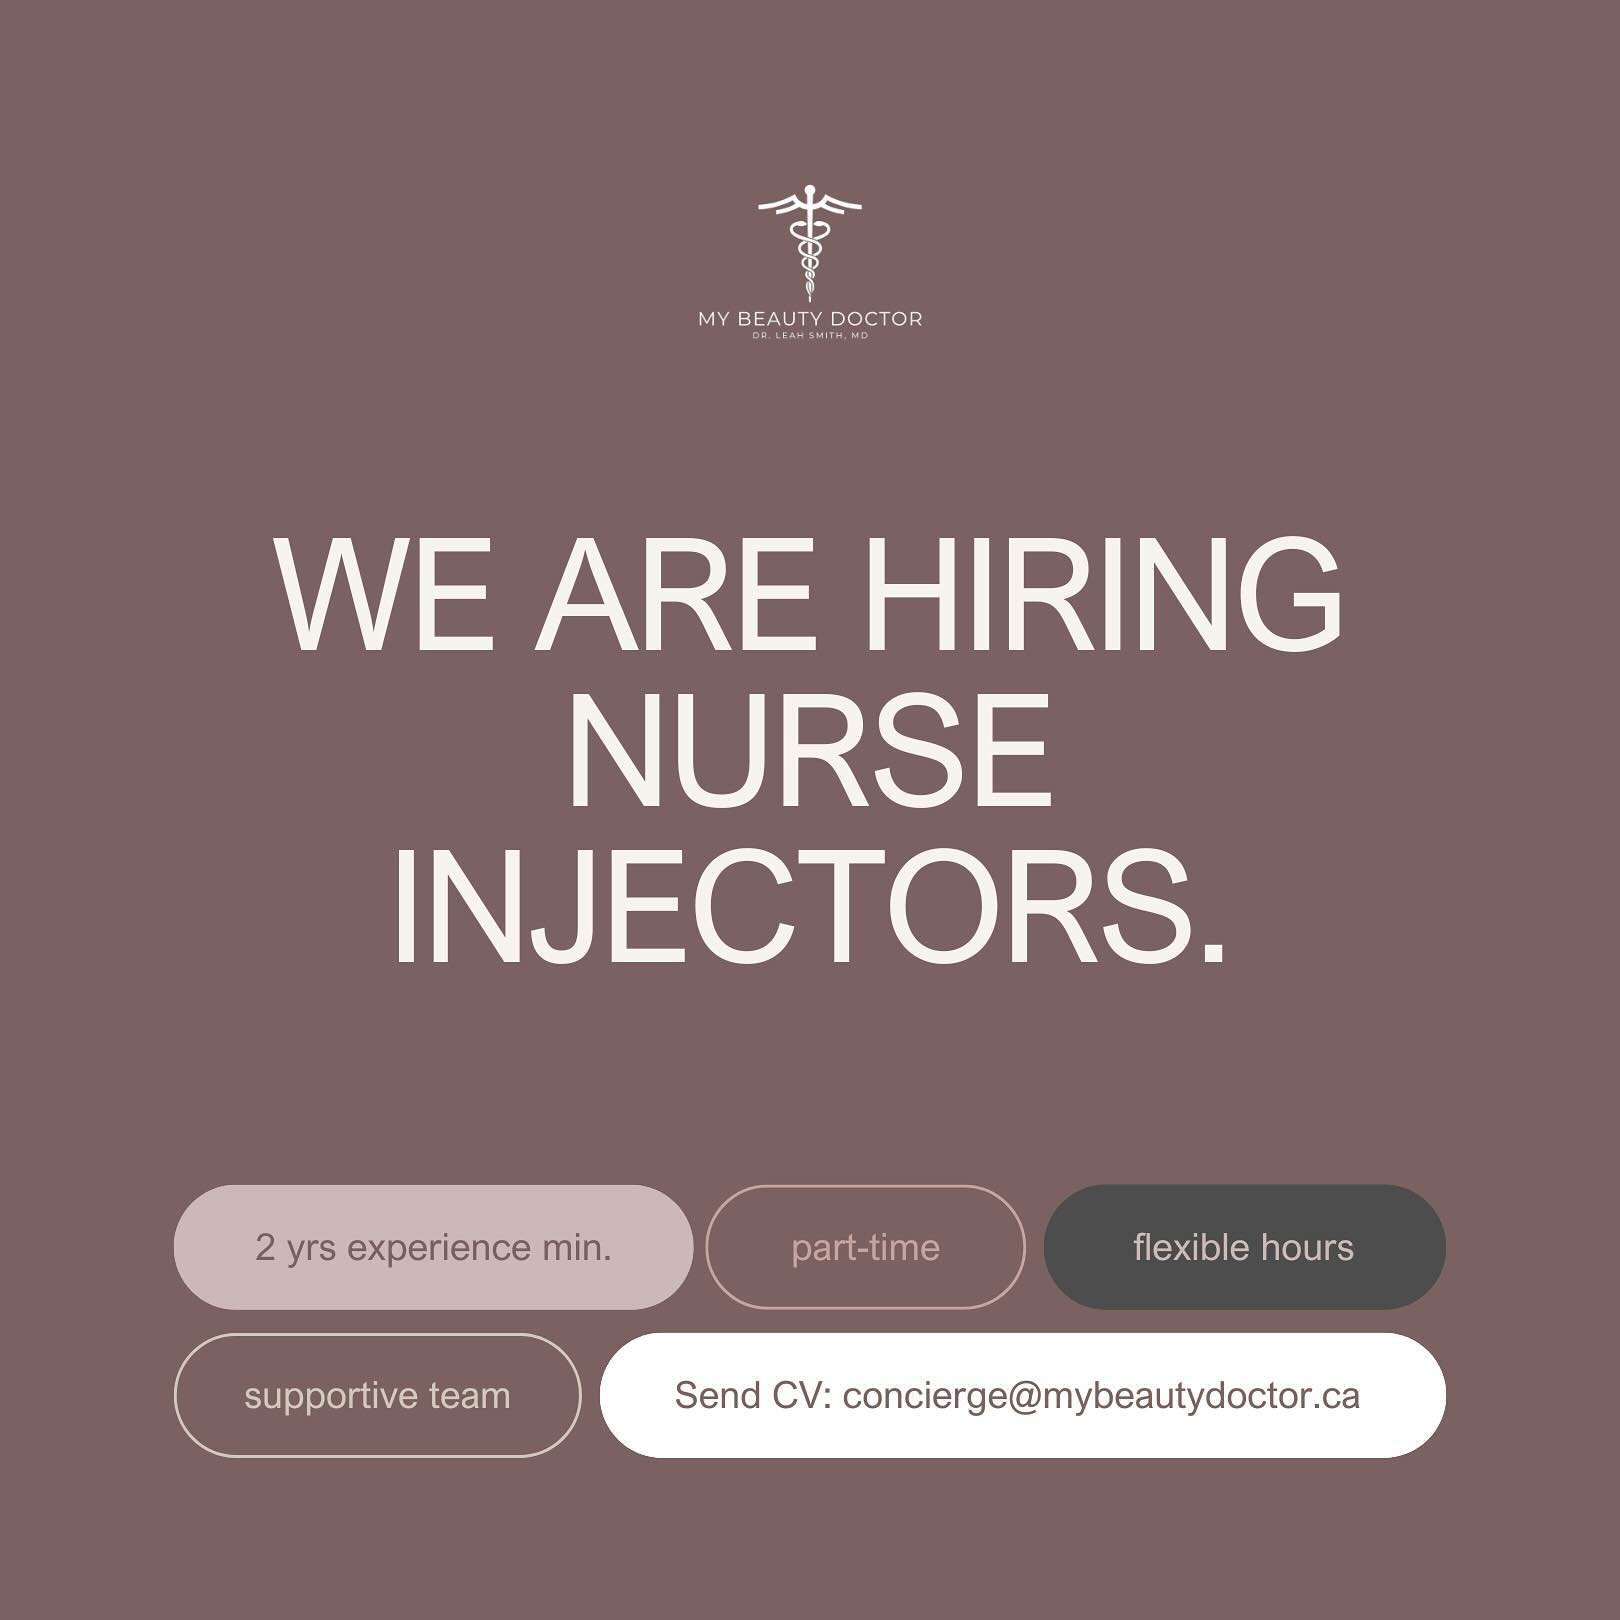 ✨JOIN THE MBD TEAM ✨
We&rsquo;re on the lookout for an experienced nurse injector to join Team MBD. If you&rsquo;re passionate about medical aesthetics and helping your clients look and feel their best, we&rsquo;d love to hear from you!

📧 To apply 